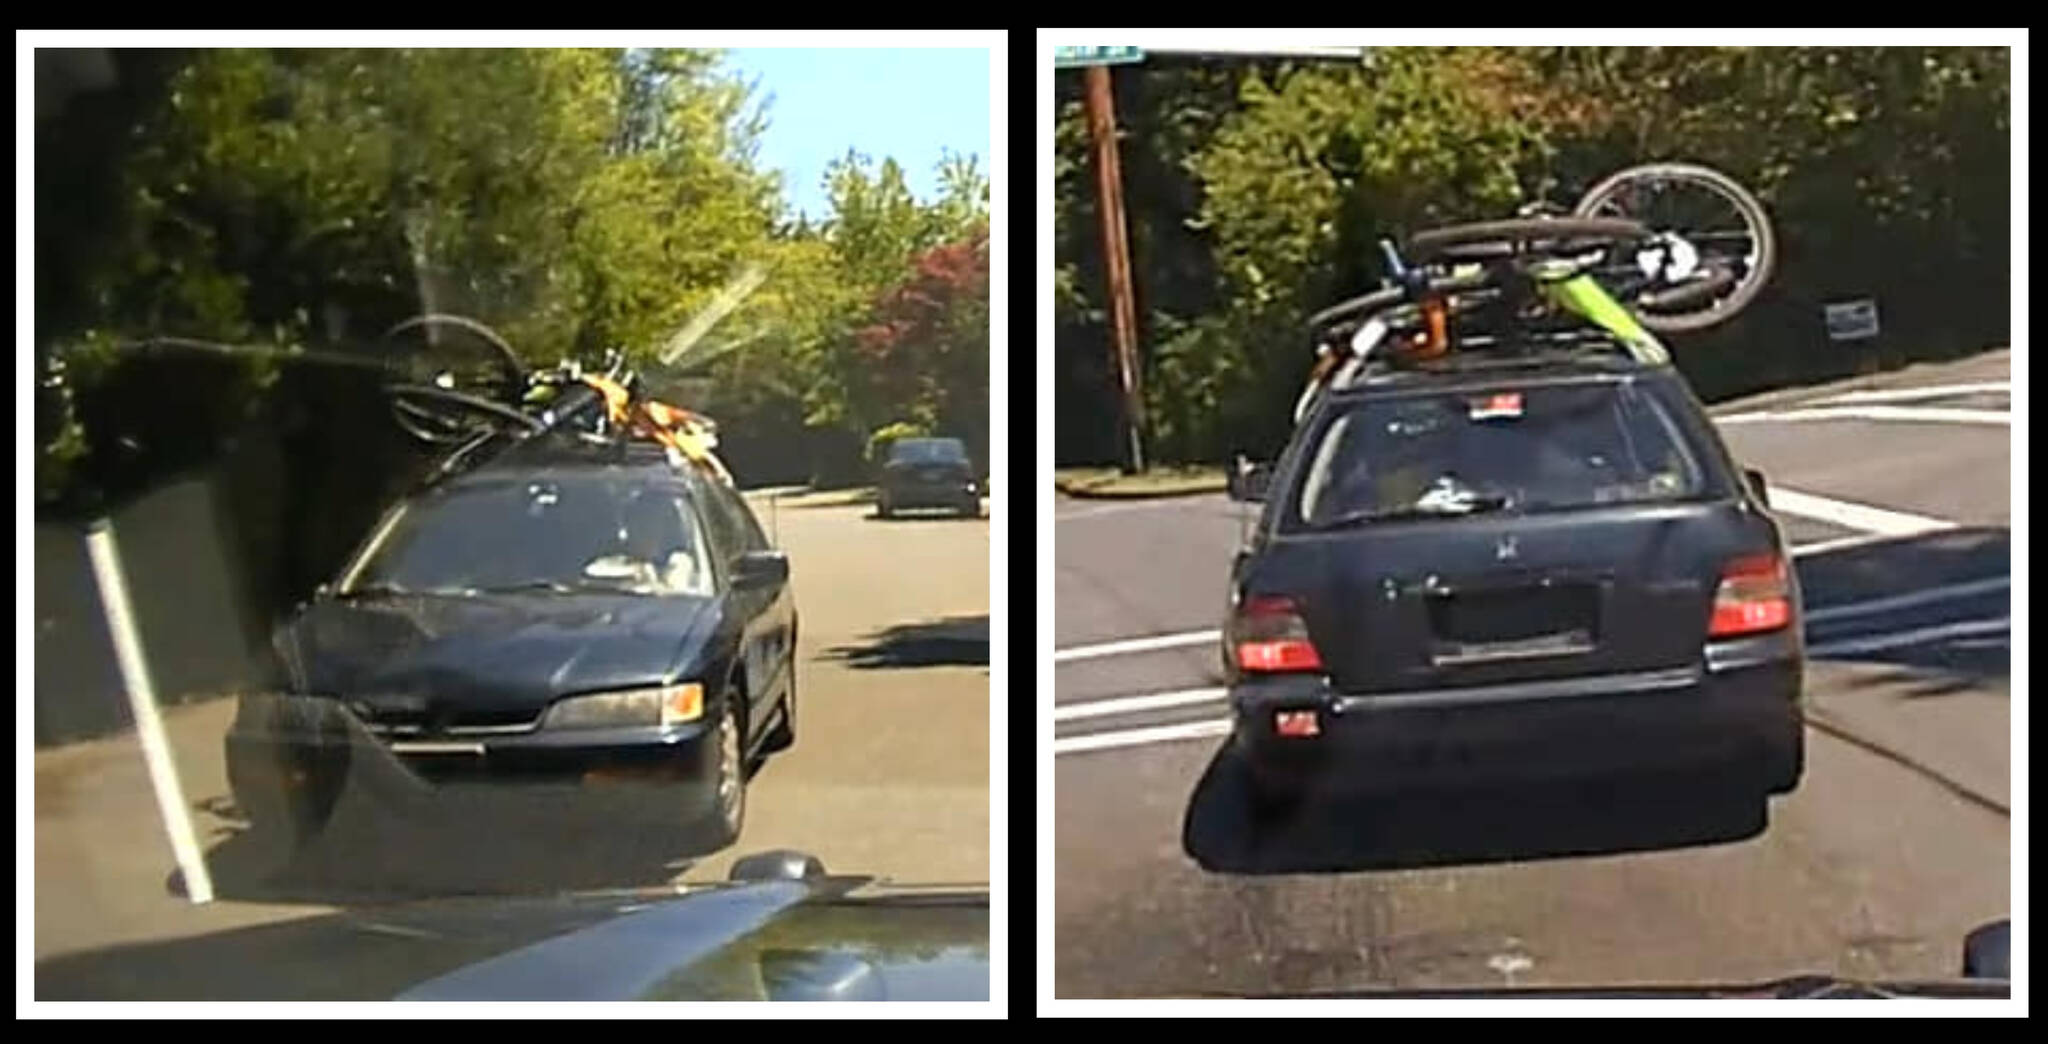 A dark green Honda Civic hatchback is a suspect vehicle in several recent Mercer Island thefts. Photos courtesy of the Mercer Island Police Department